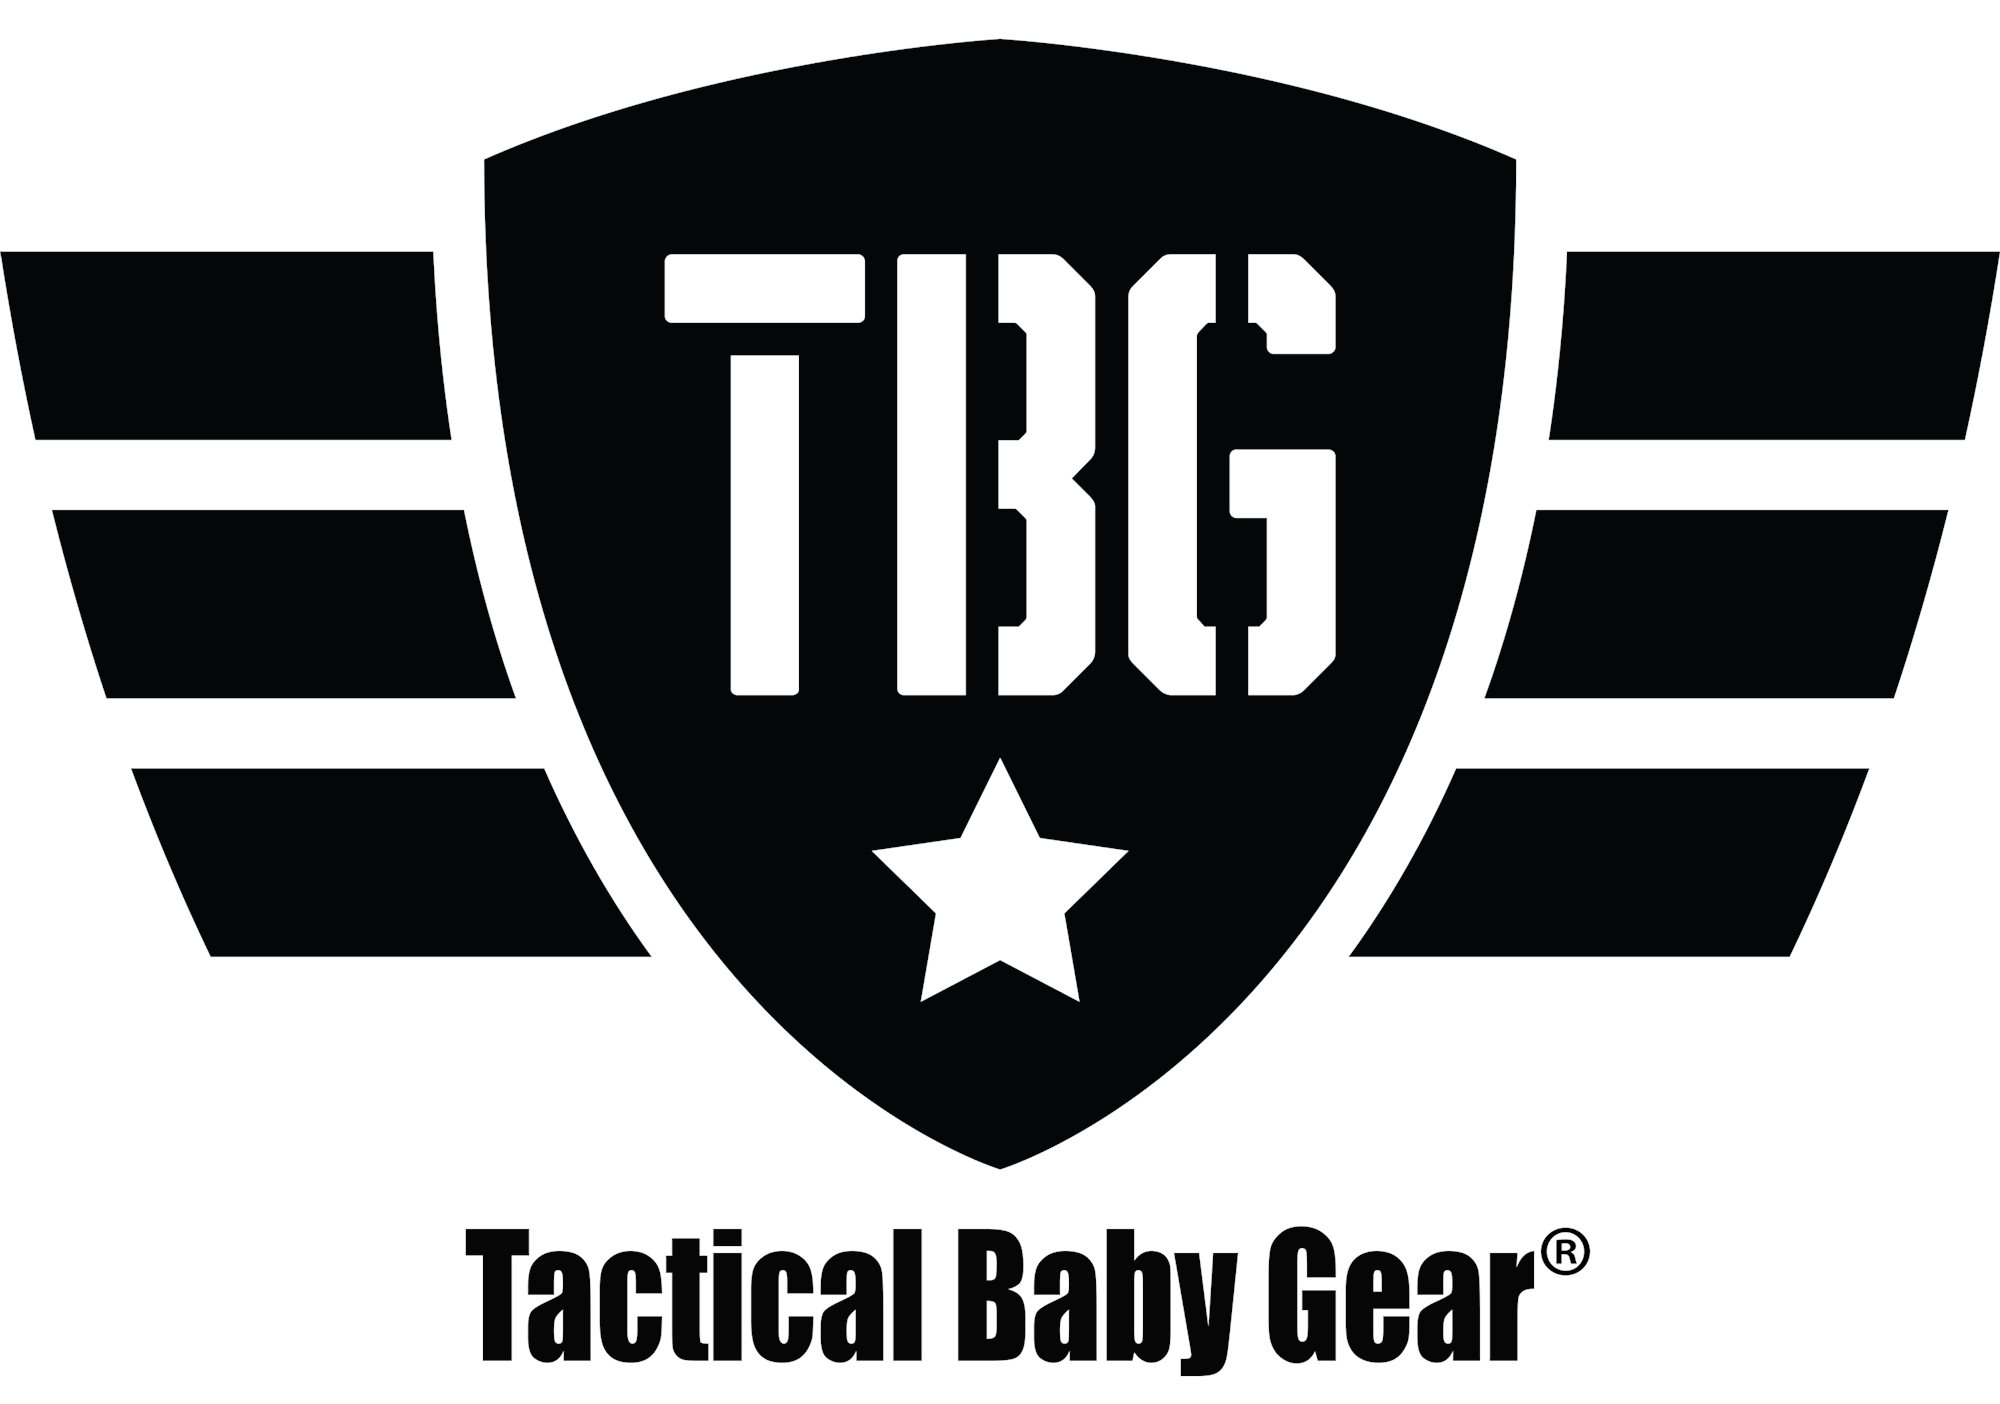 In Partnership with tacticalbabygear.com